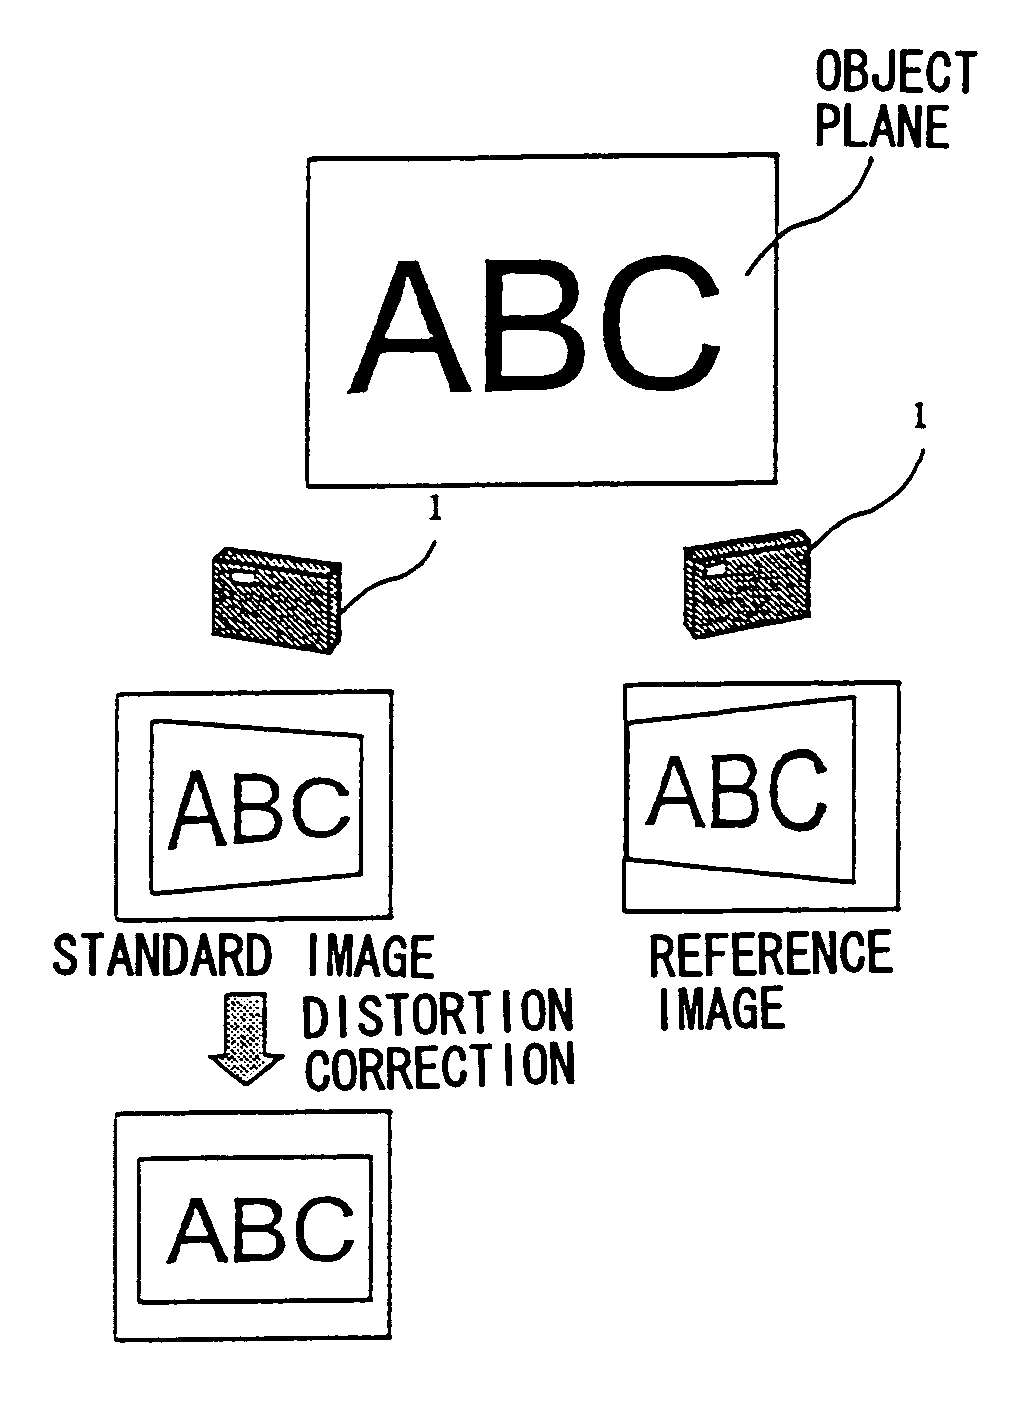 Image processing method and apparatus, digital camera, image processing system and computer readable medium